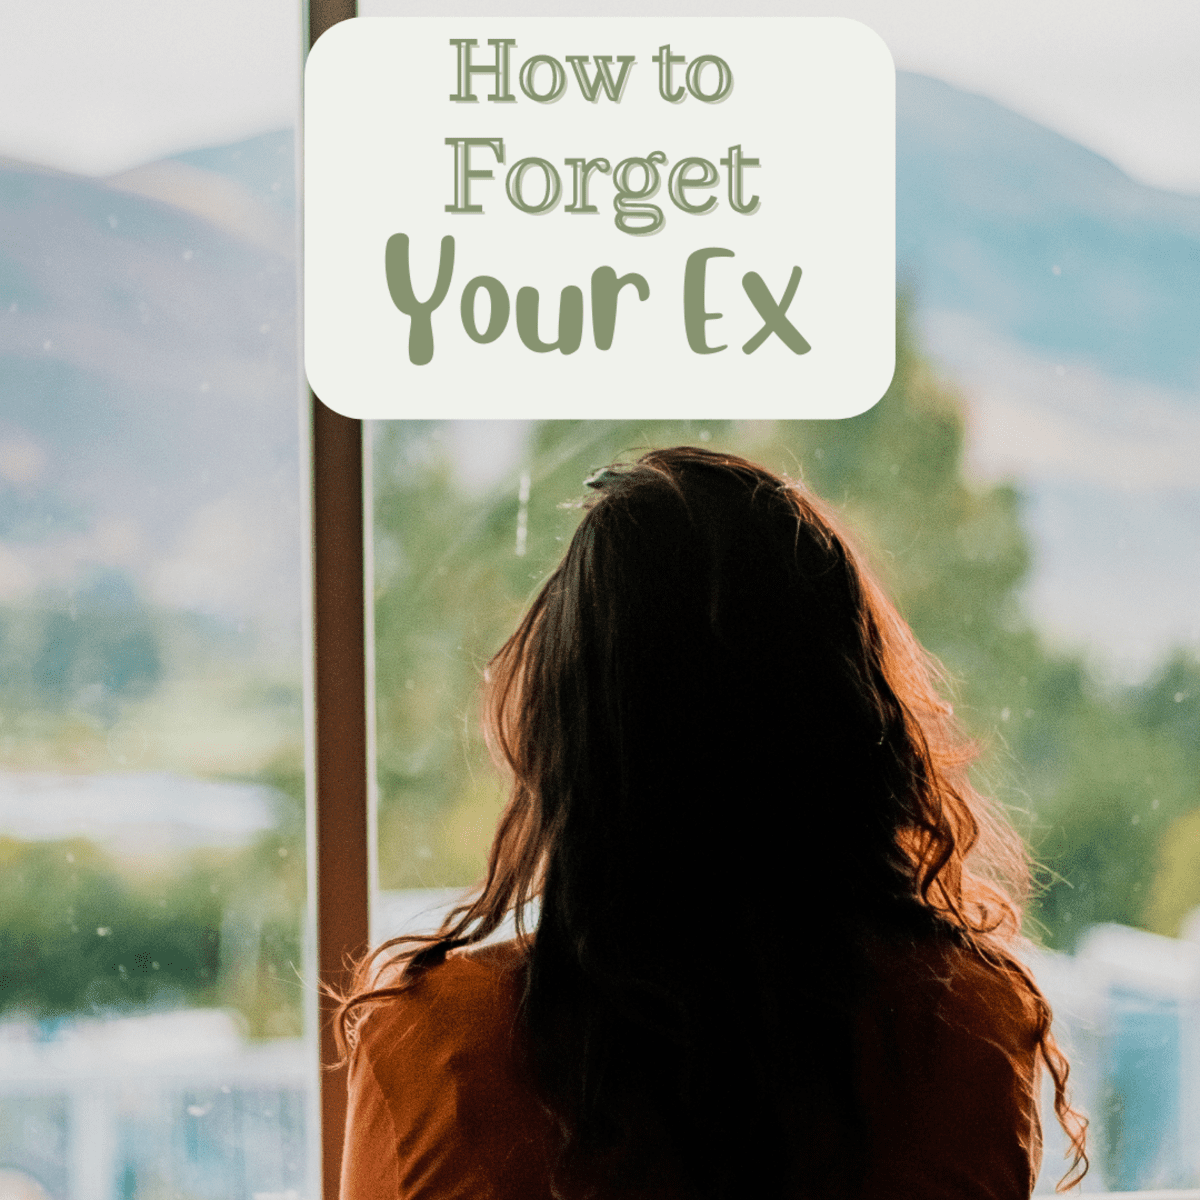 Is someone you dated considered an ex?